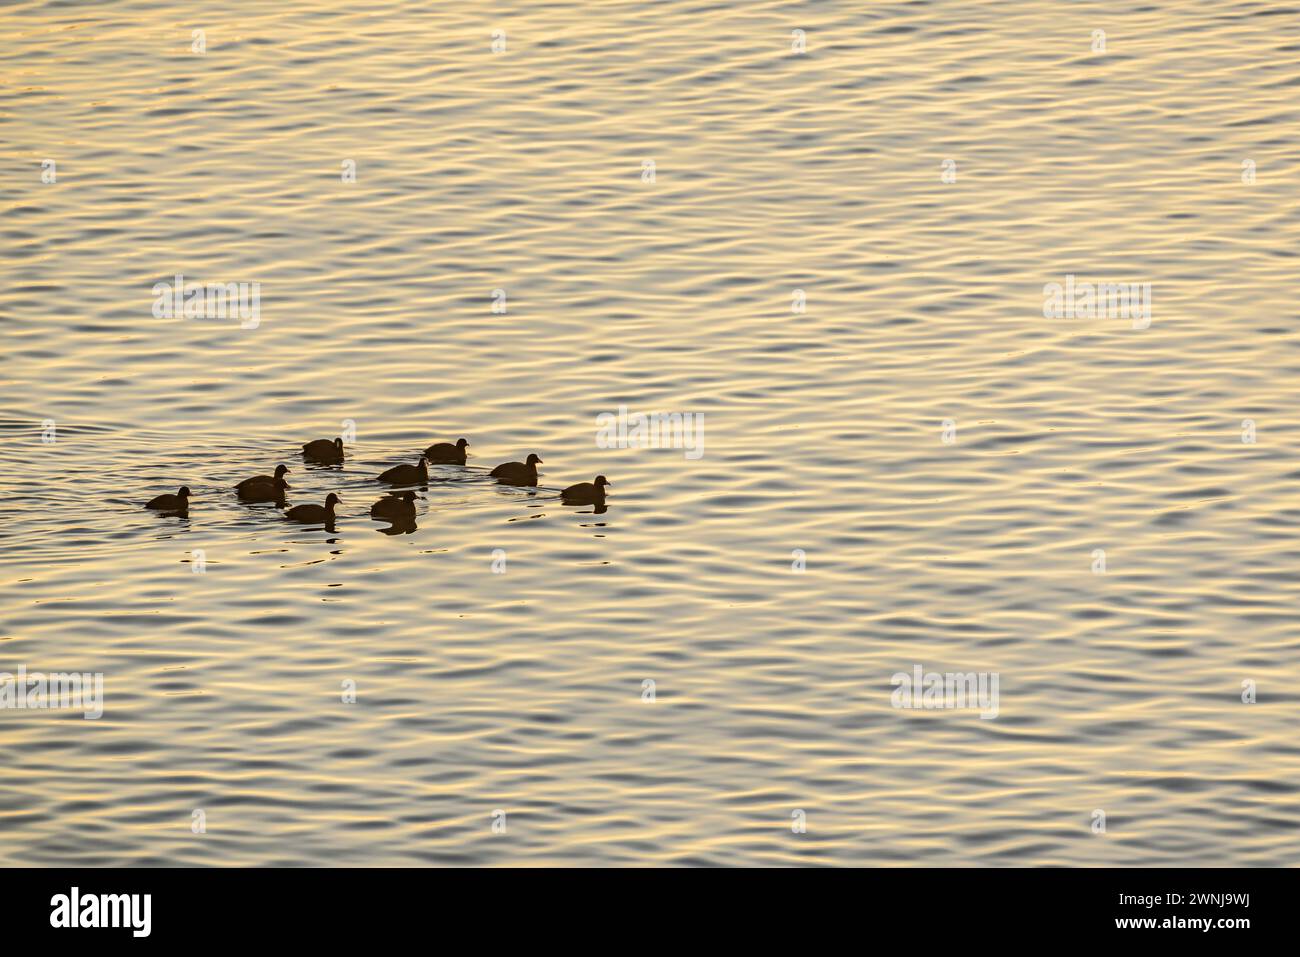 Some ducks at sunrise on the Ebro river seen from the Zigurat viewpoint, at the mouth of the Ebro River (Tarragona, Catalonia, Spain) Stock Photo